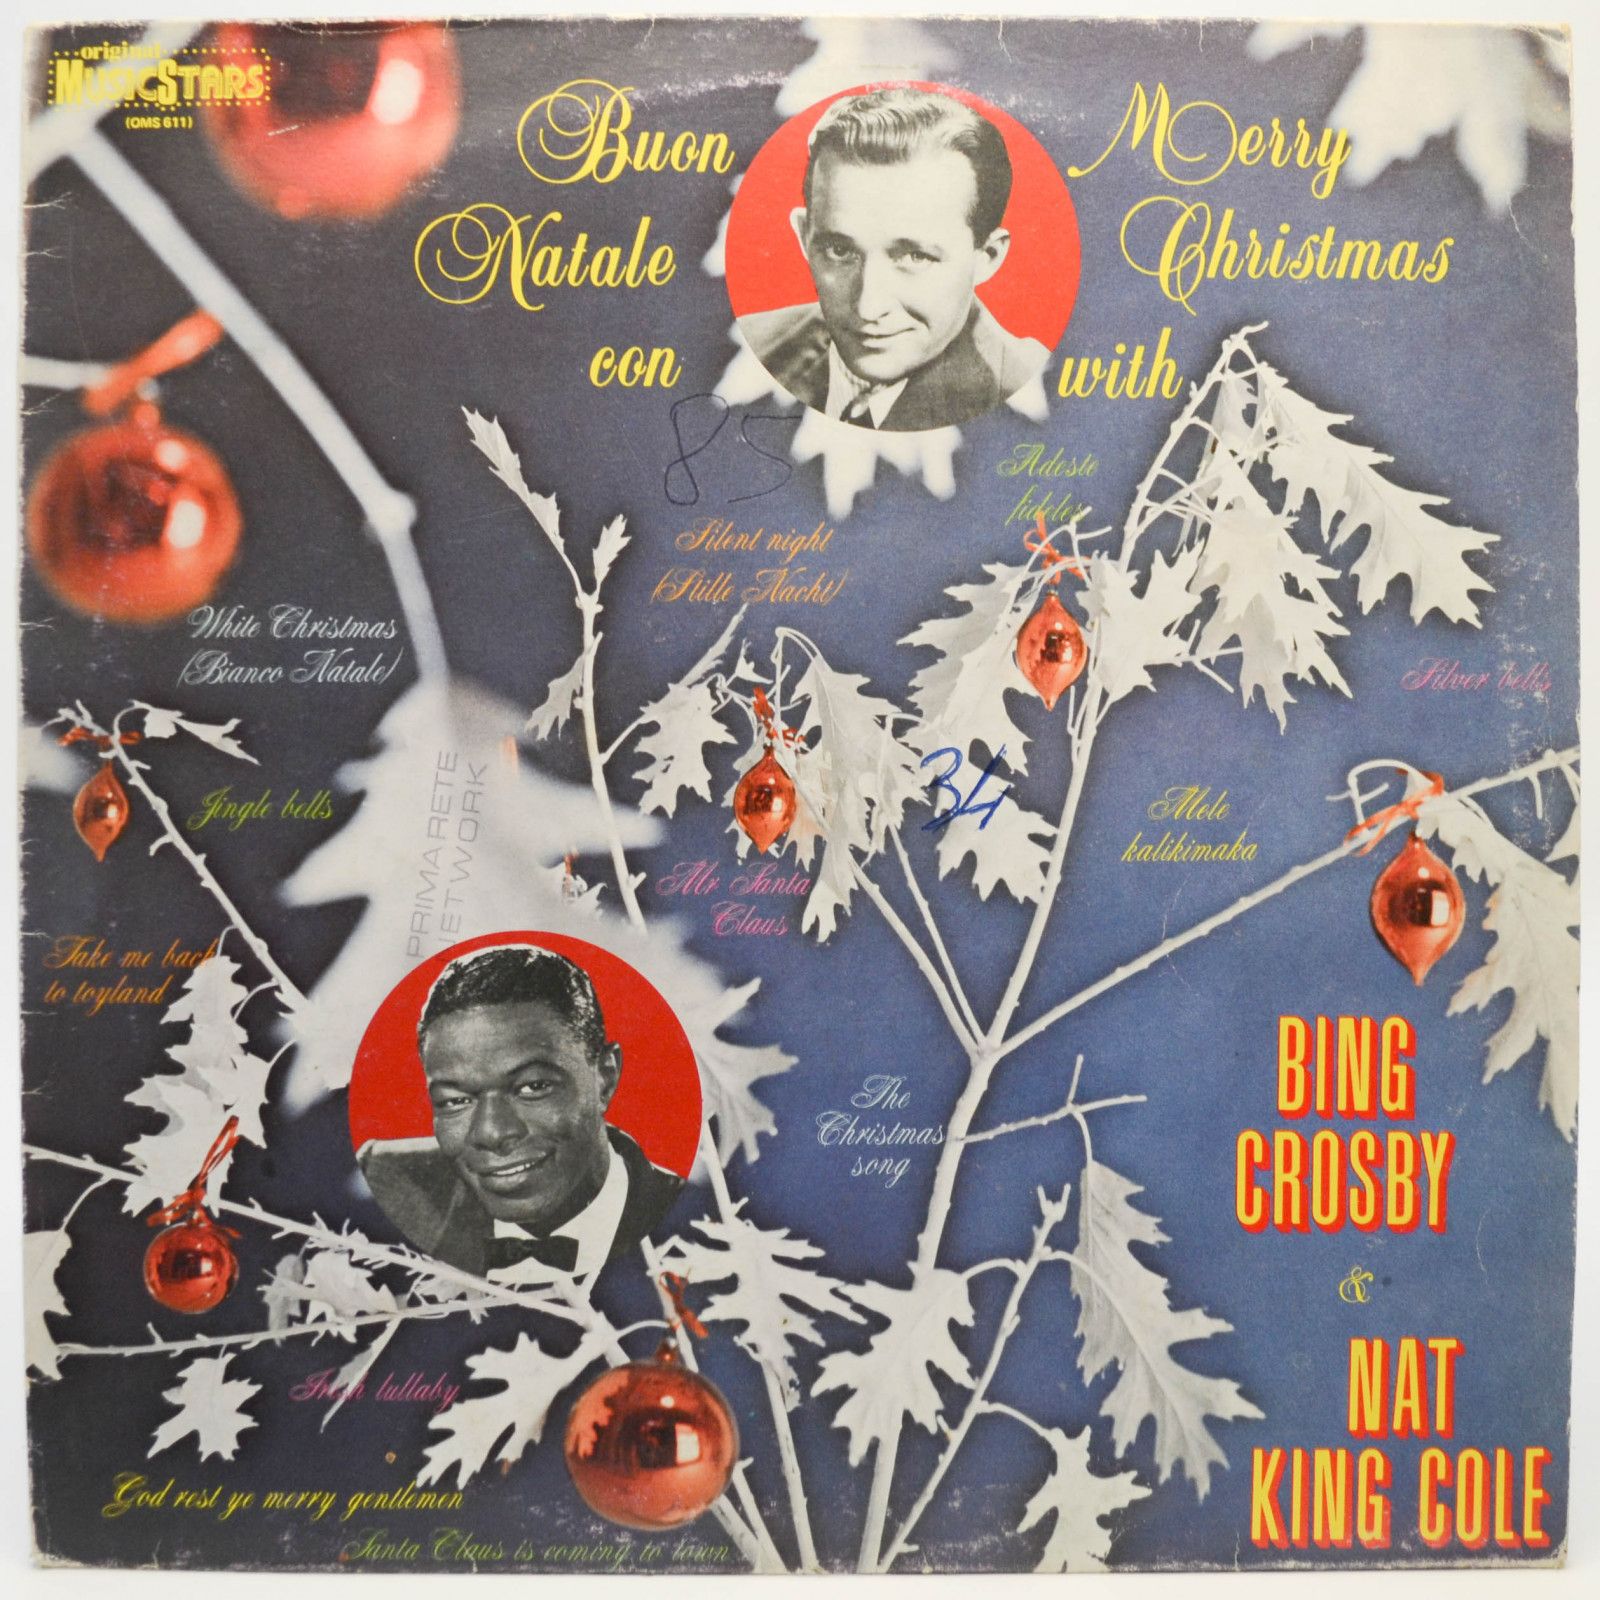 Bing Crosby, Nat King Cole — Buon Natale Con/Merry Christmas With, 1985